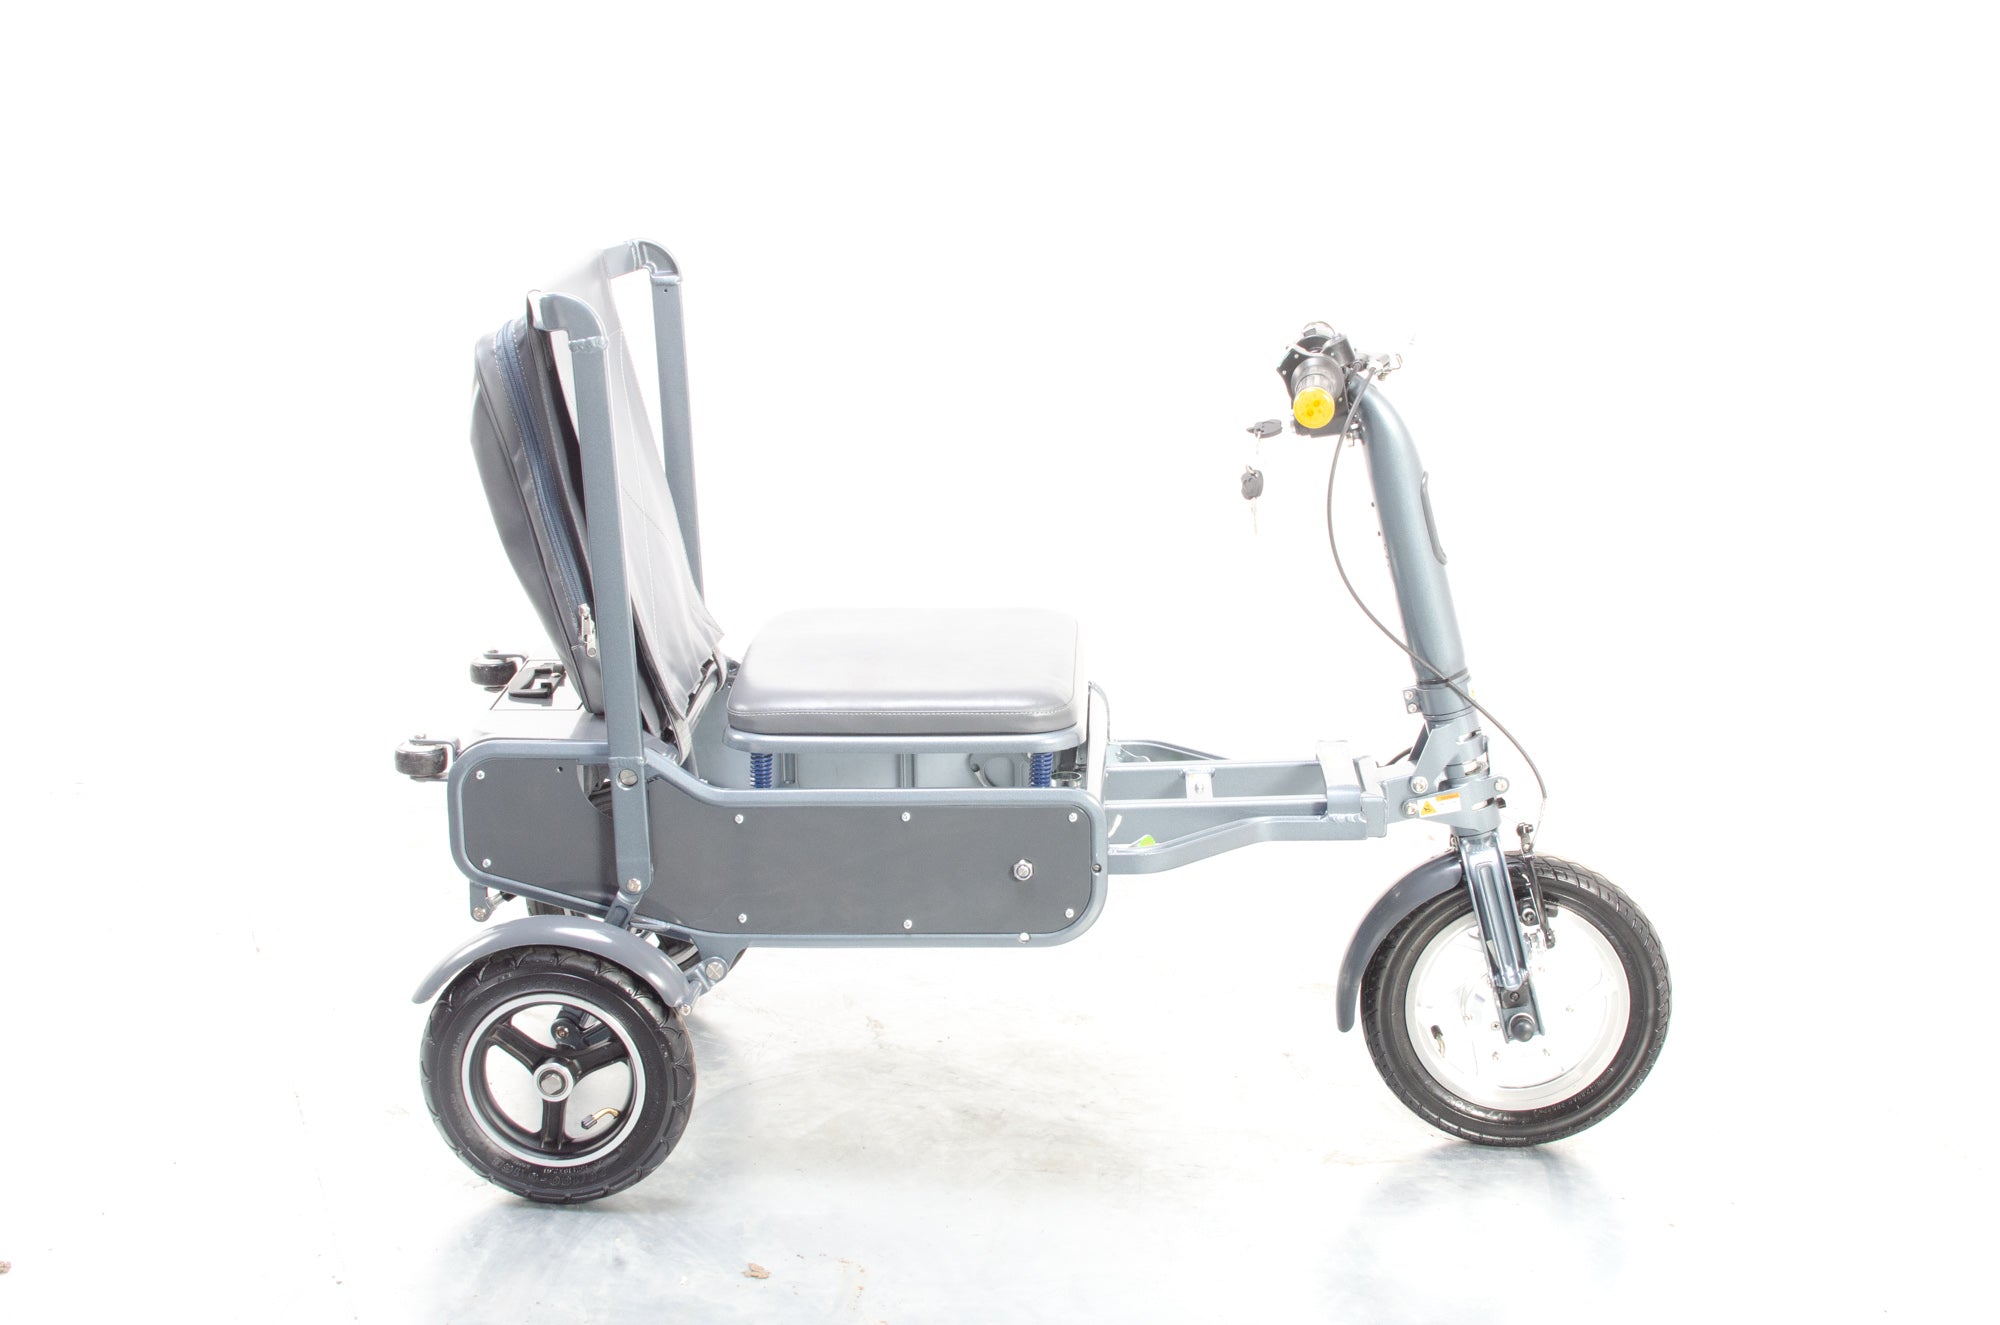 eFOLDI Lightweight Folding Electric Mobility Scooter 8mph Used